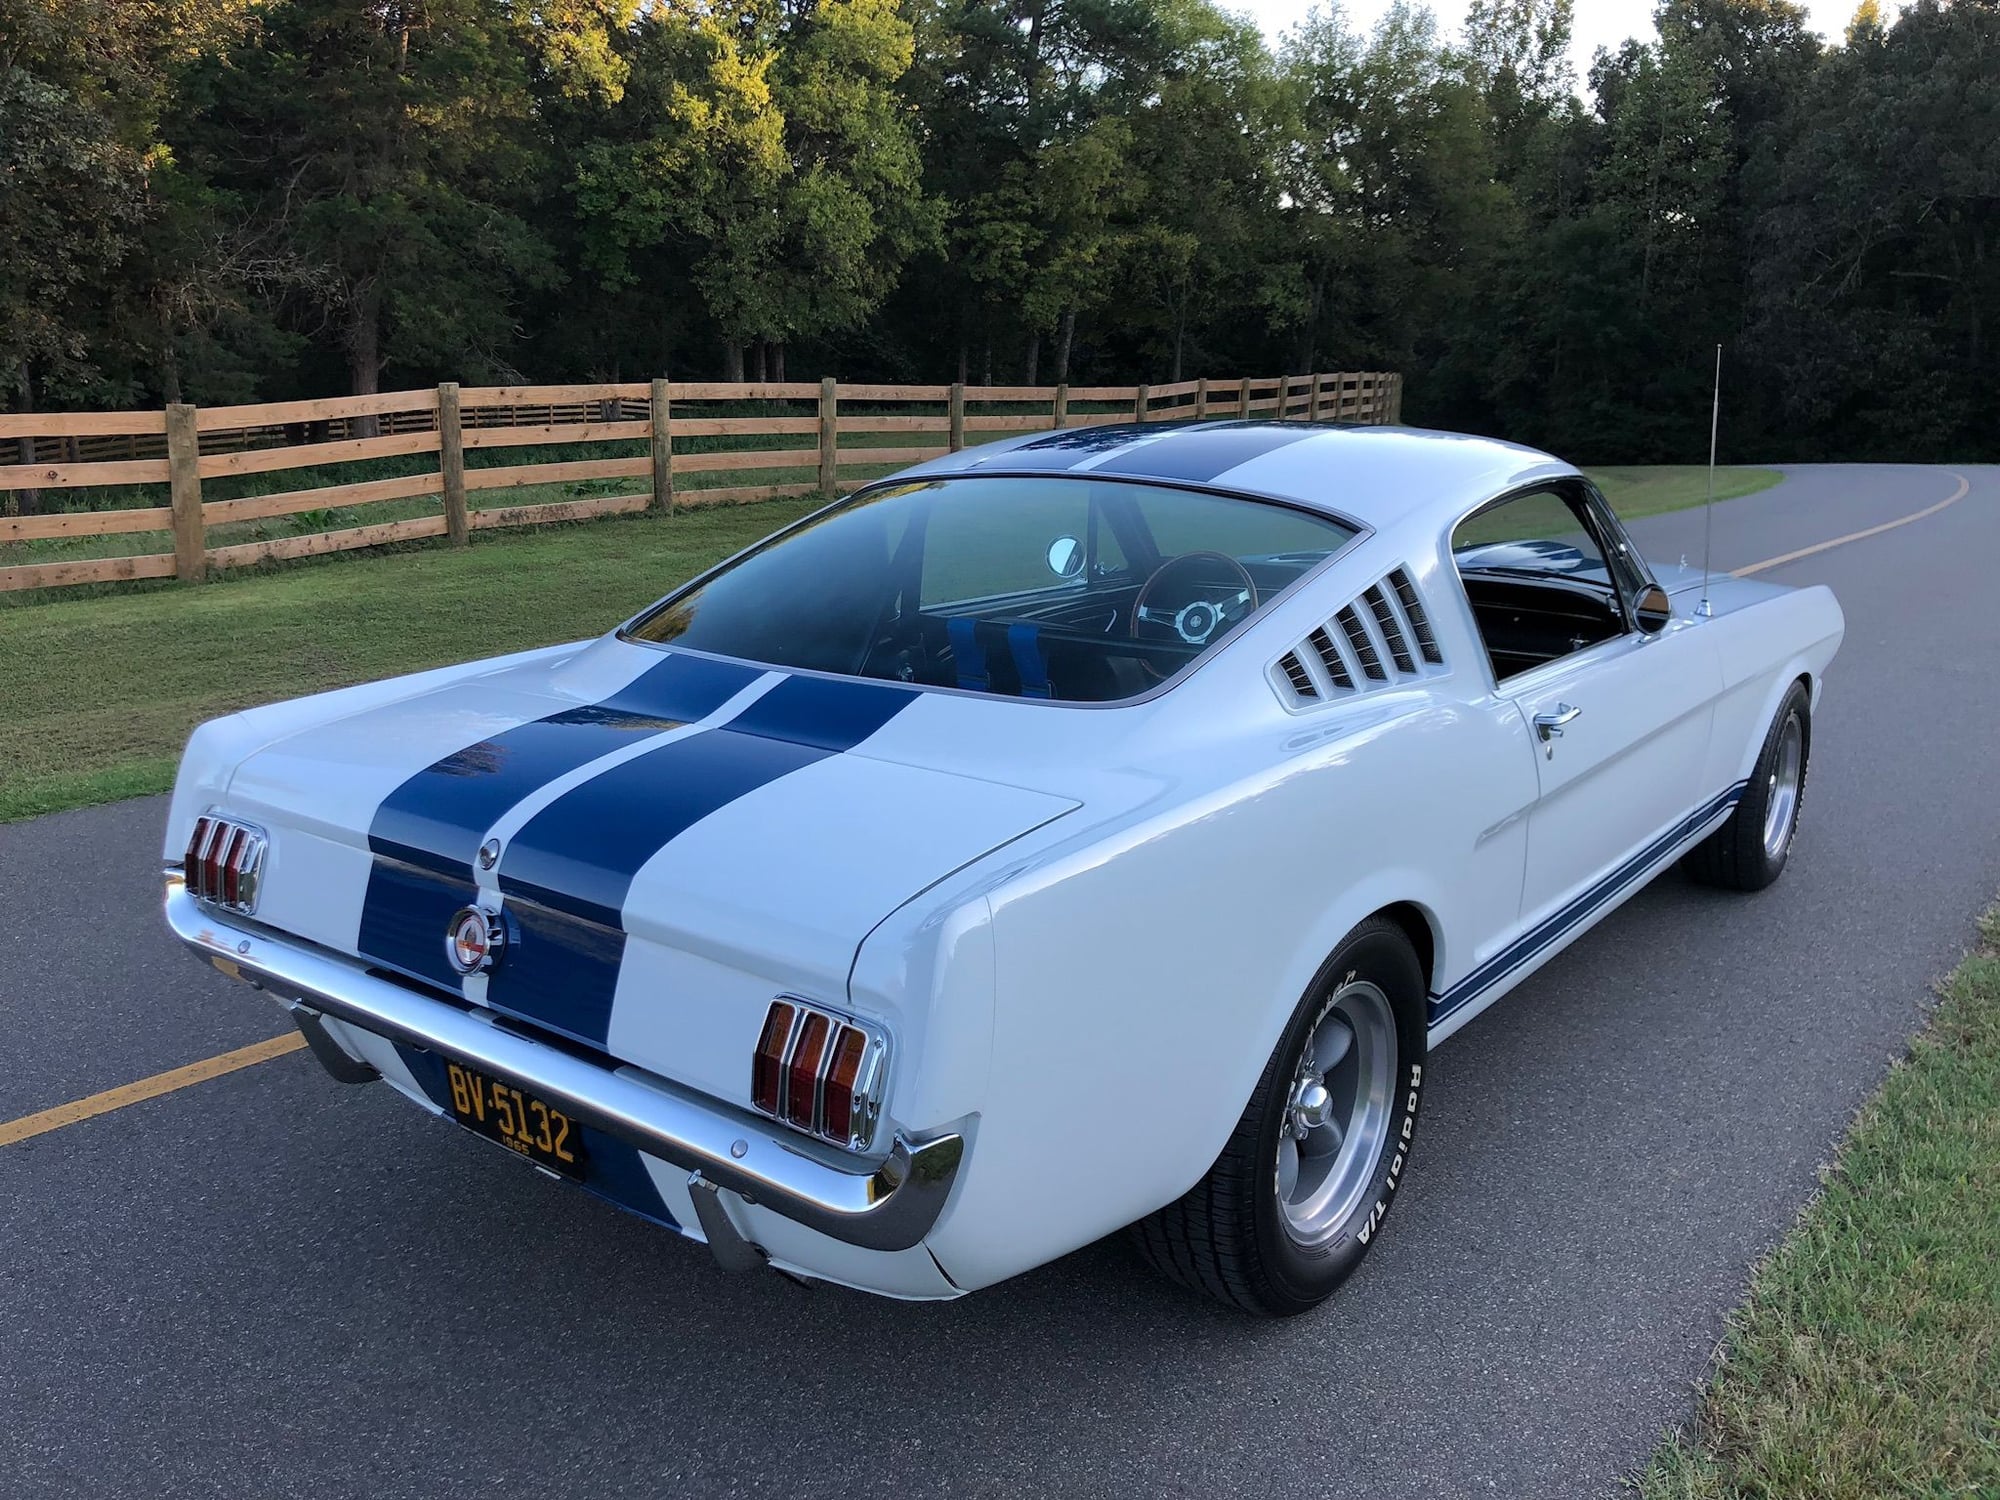 1965 Ford Mustang - Well built 1965 Mustang Fastback Restomod - Used - VIN 0000005F09A350495 - 8 cyl - 2WD - Manual - Coupe - White - Burlington, NC 27215, United States